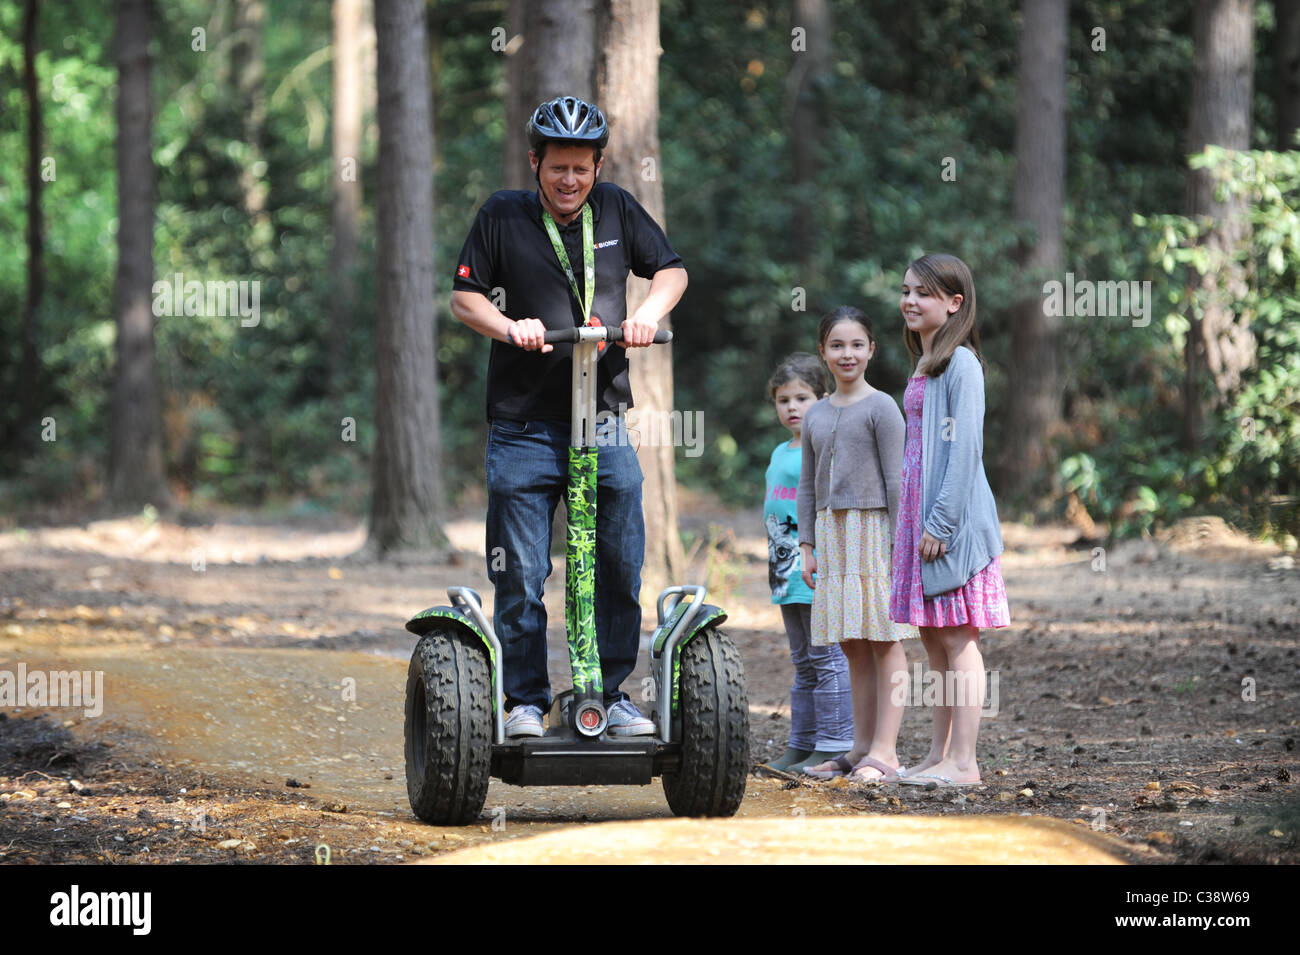 Mike Bushell High Resolution Stock Photography and Images - Alamy